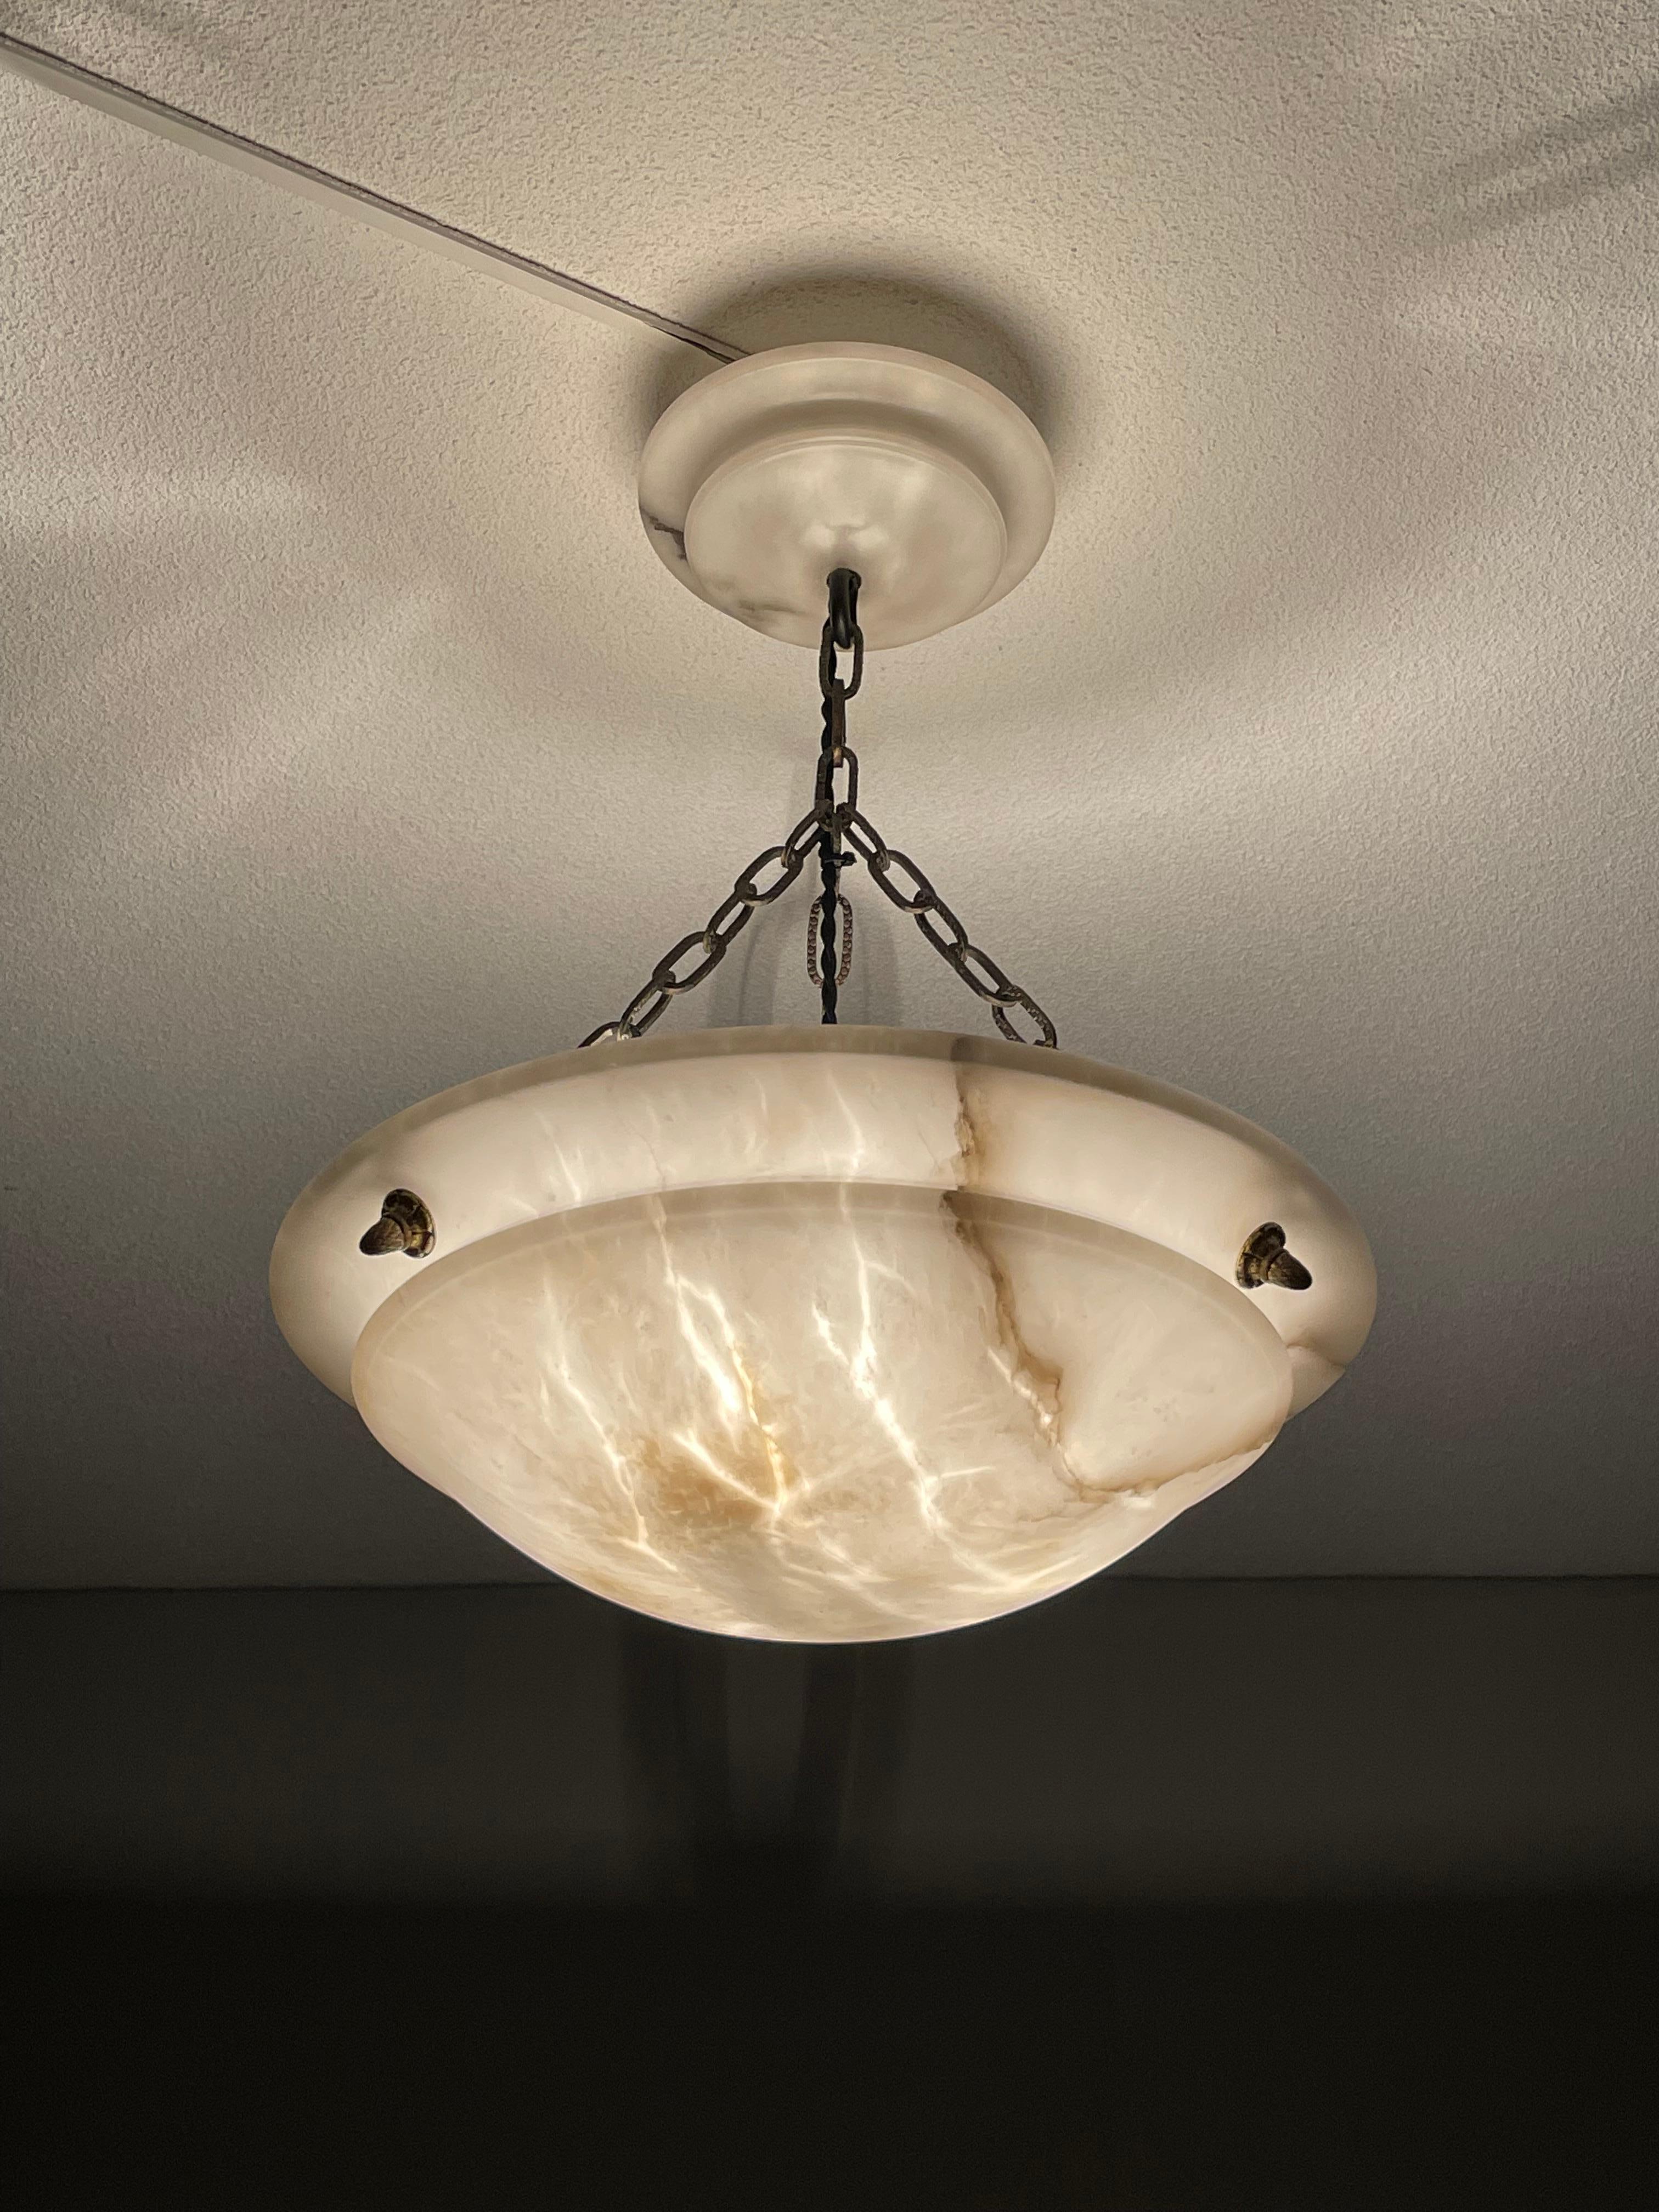 European Striking Antique Pendant / Flushmount with Matching Alabaster Shade and Canopy